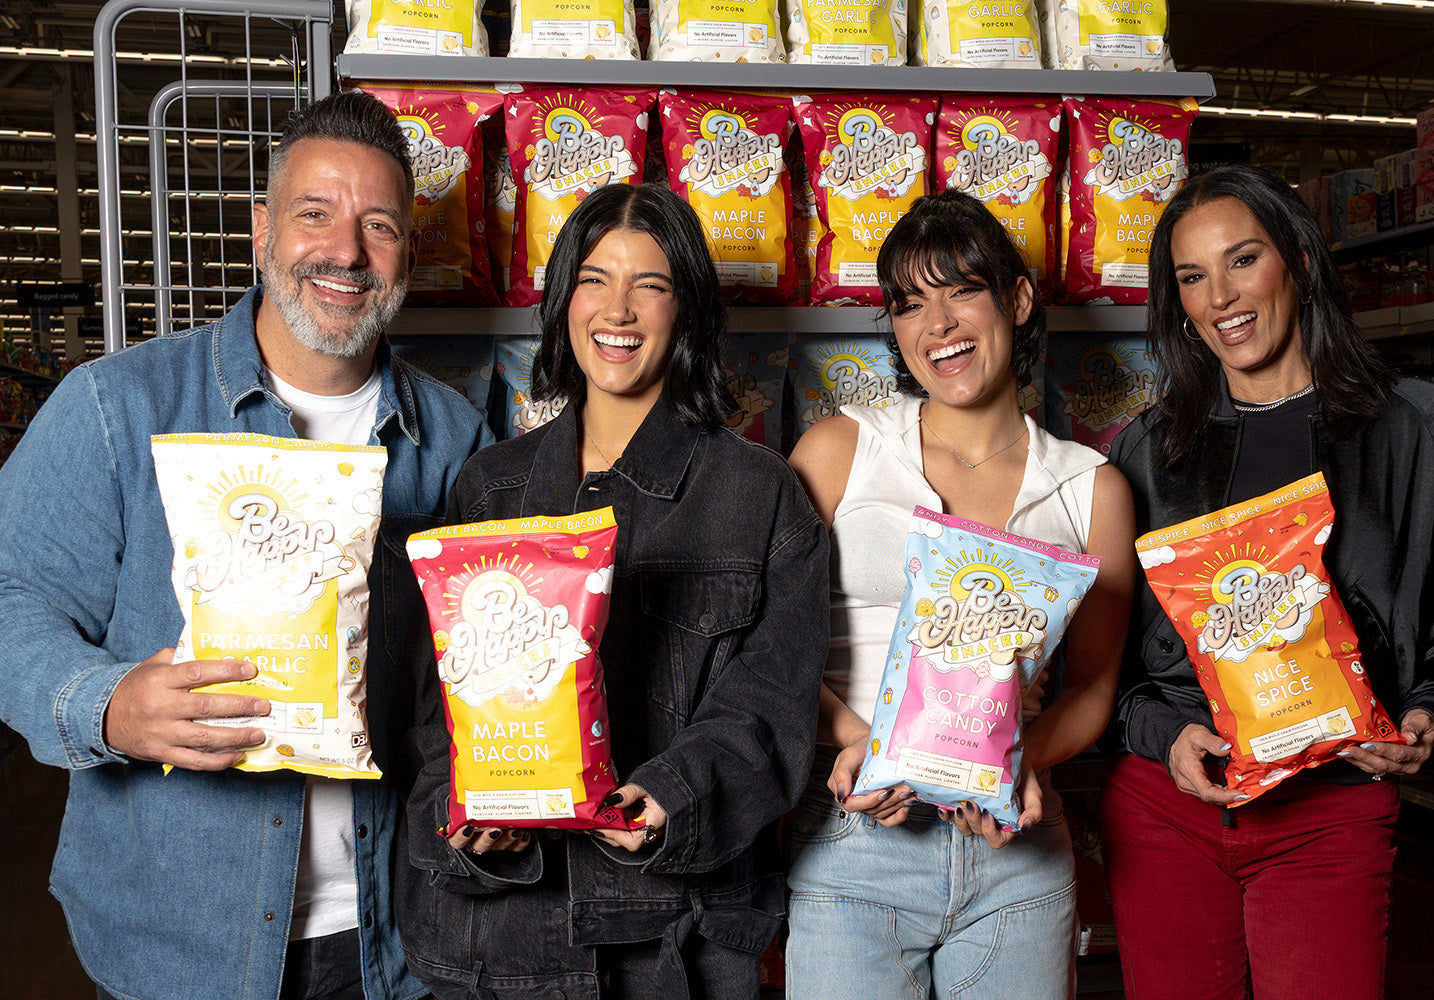 Family of 4 standing in a shopping store holding up bags of Be Happy Snacks Popcorn